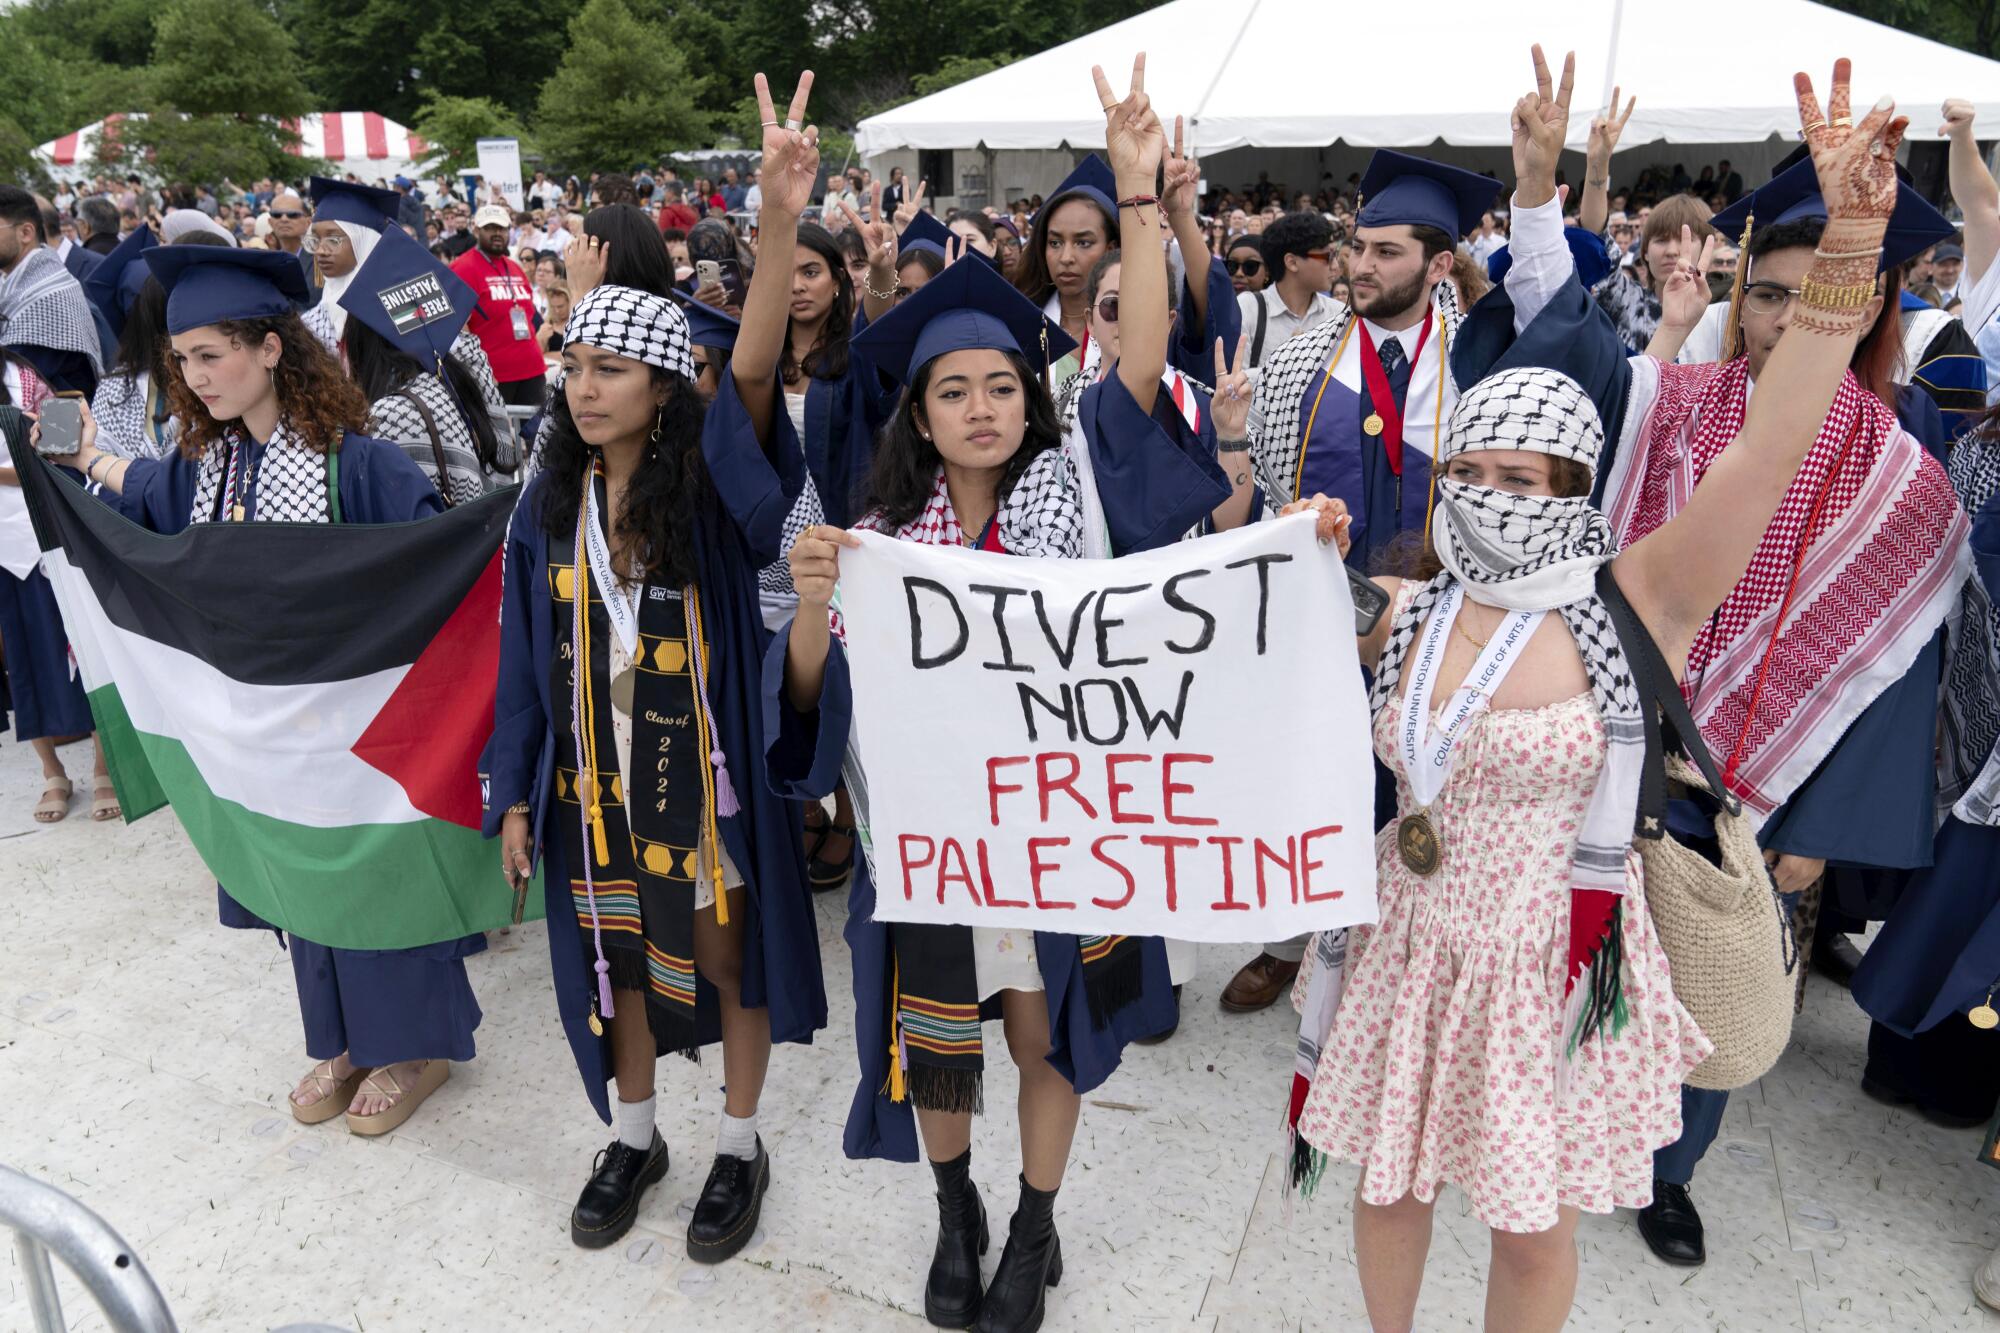 Students hold signs and a Palestinian flag during a protest.